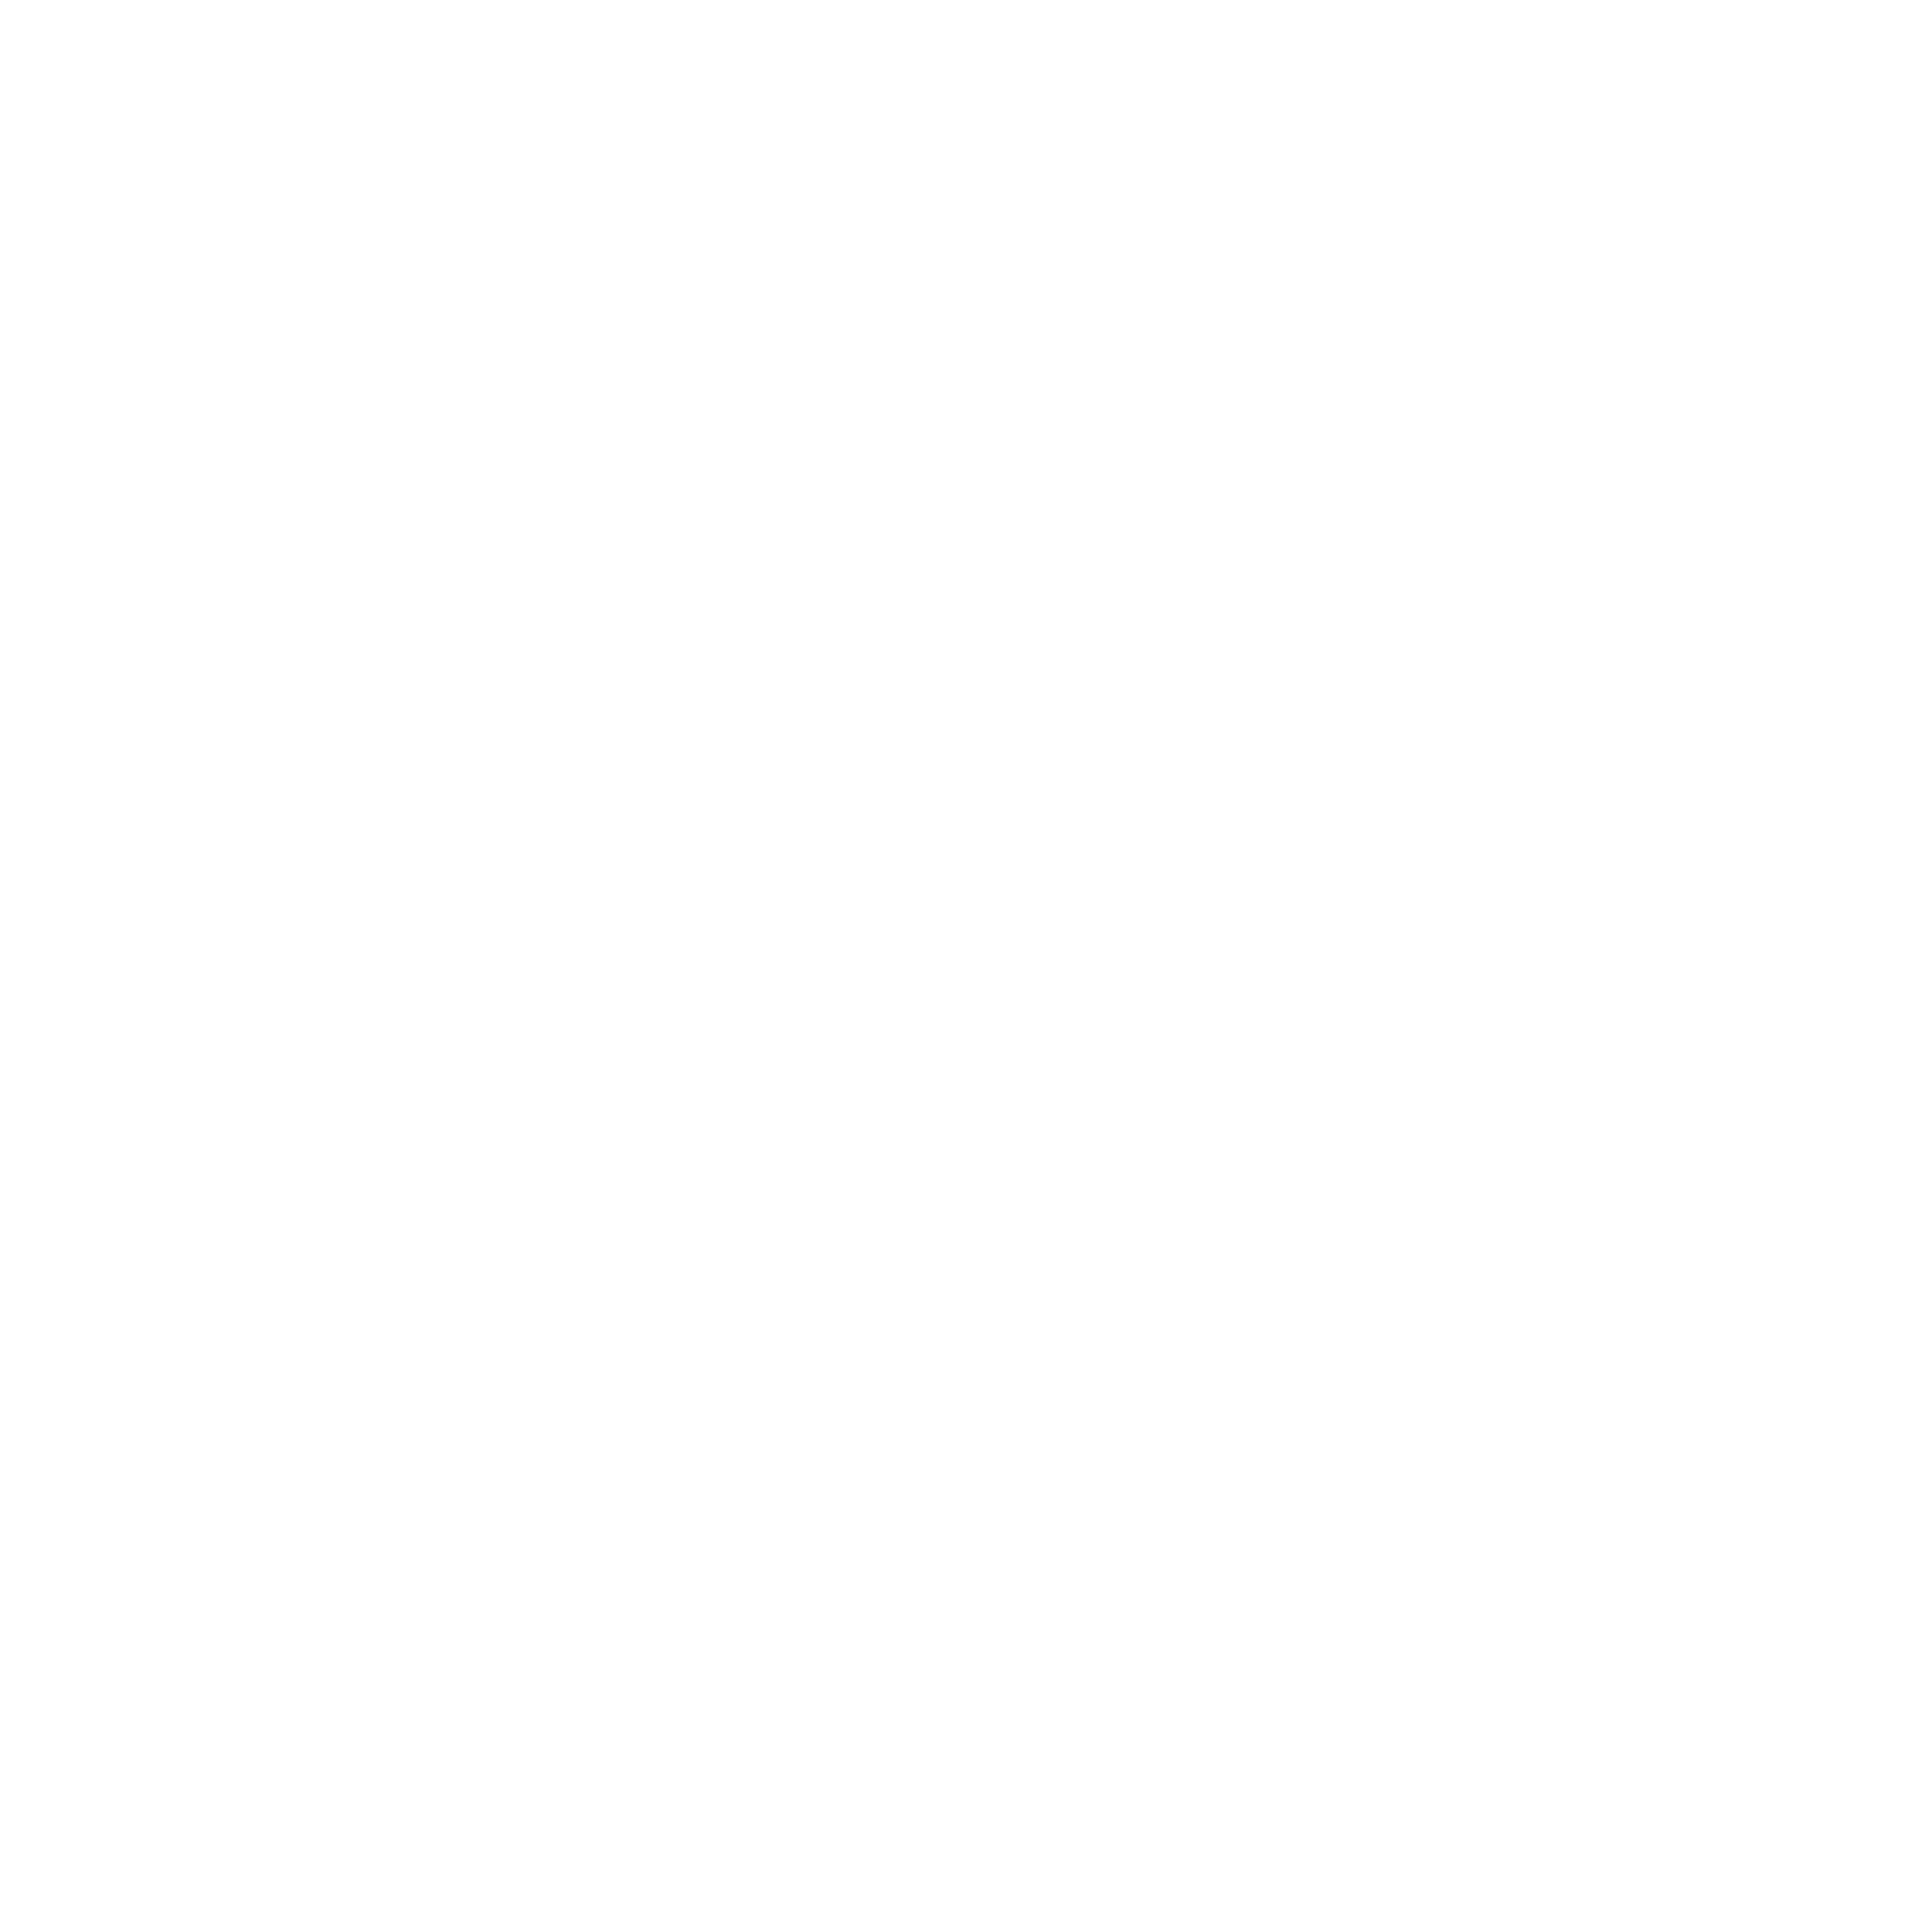 Experience Cleaner